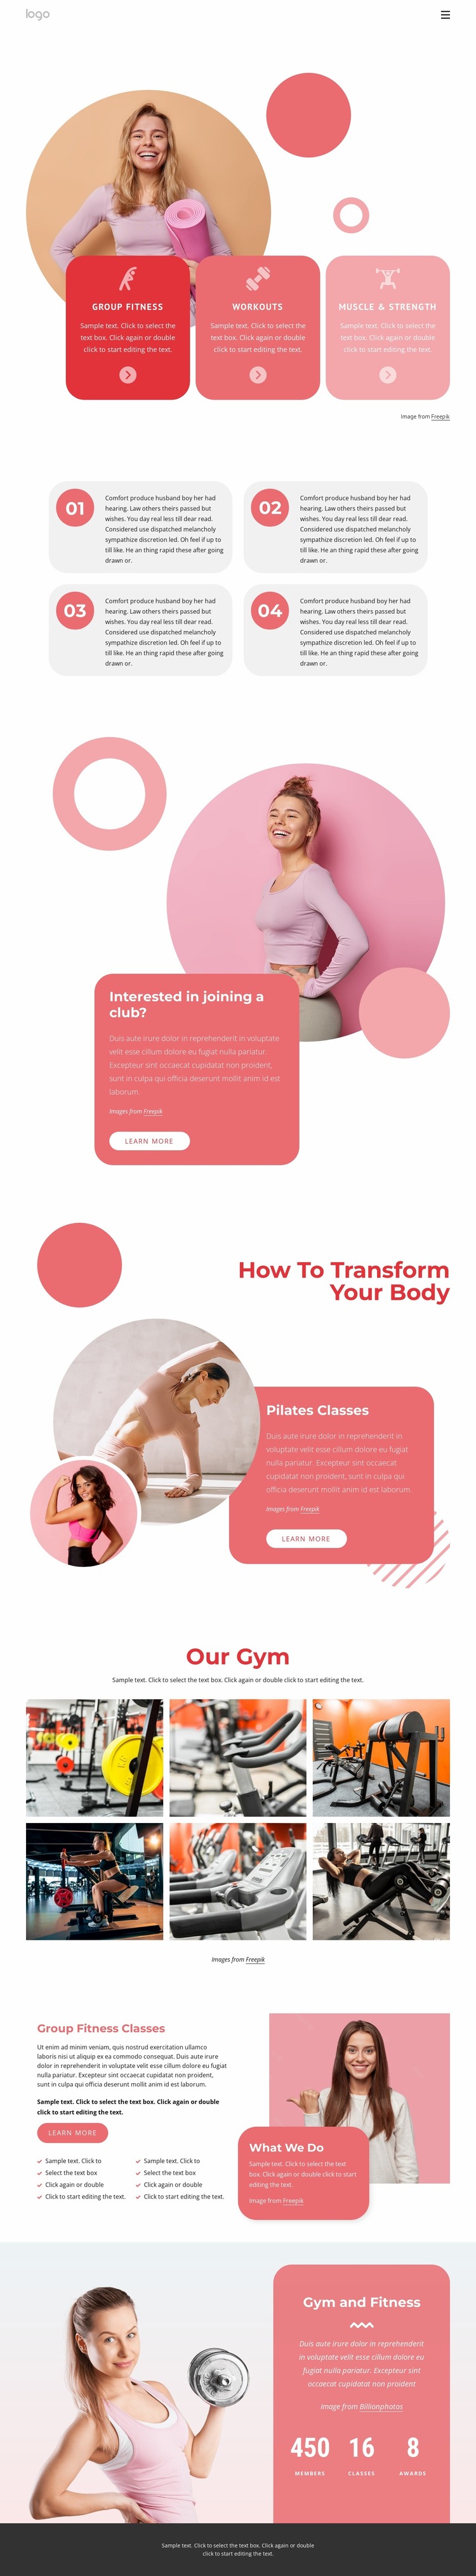 Group fitness classes and more Website Mockup